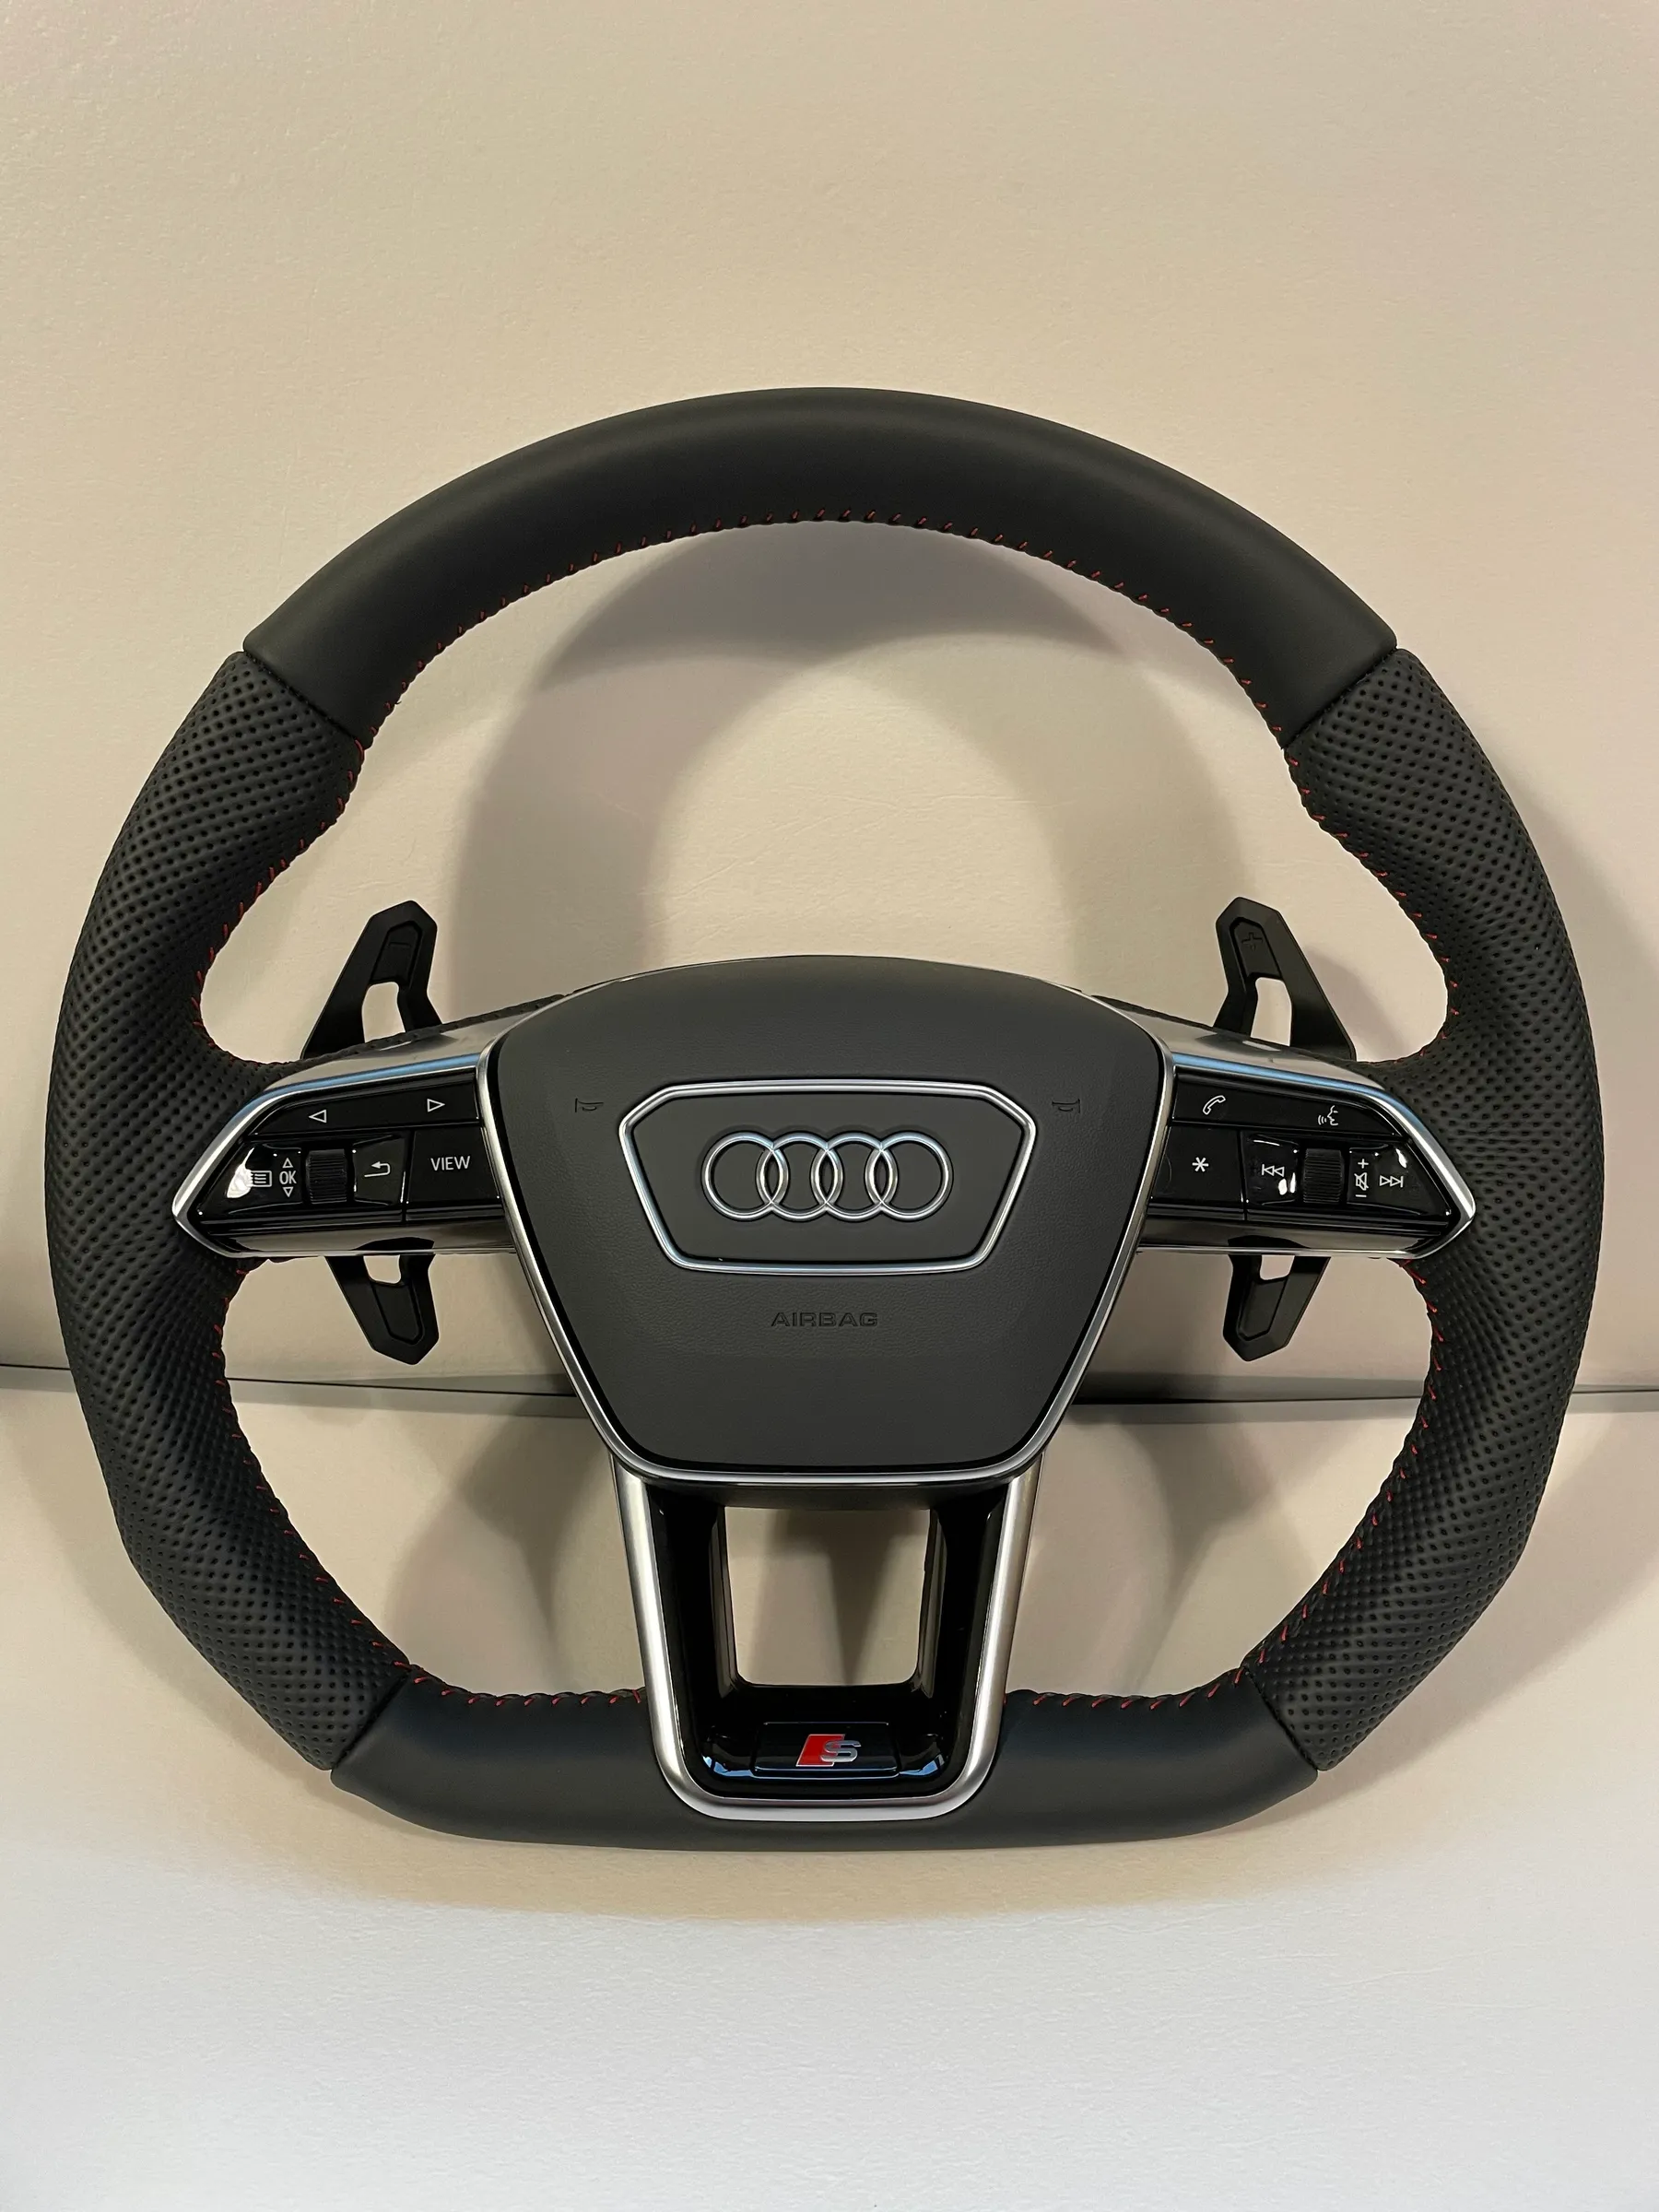 Audi A6/ A7 C8 steering wheel with airbag and urus paddle shifters – Modhub Steering  Wheels